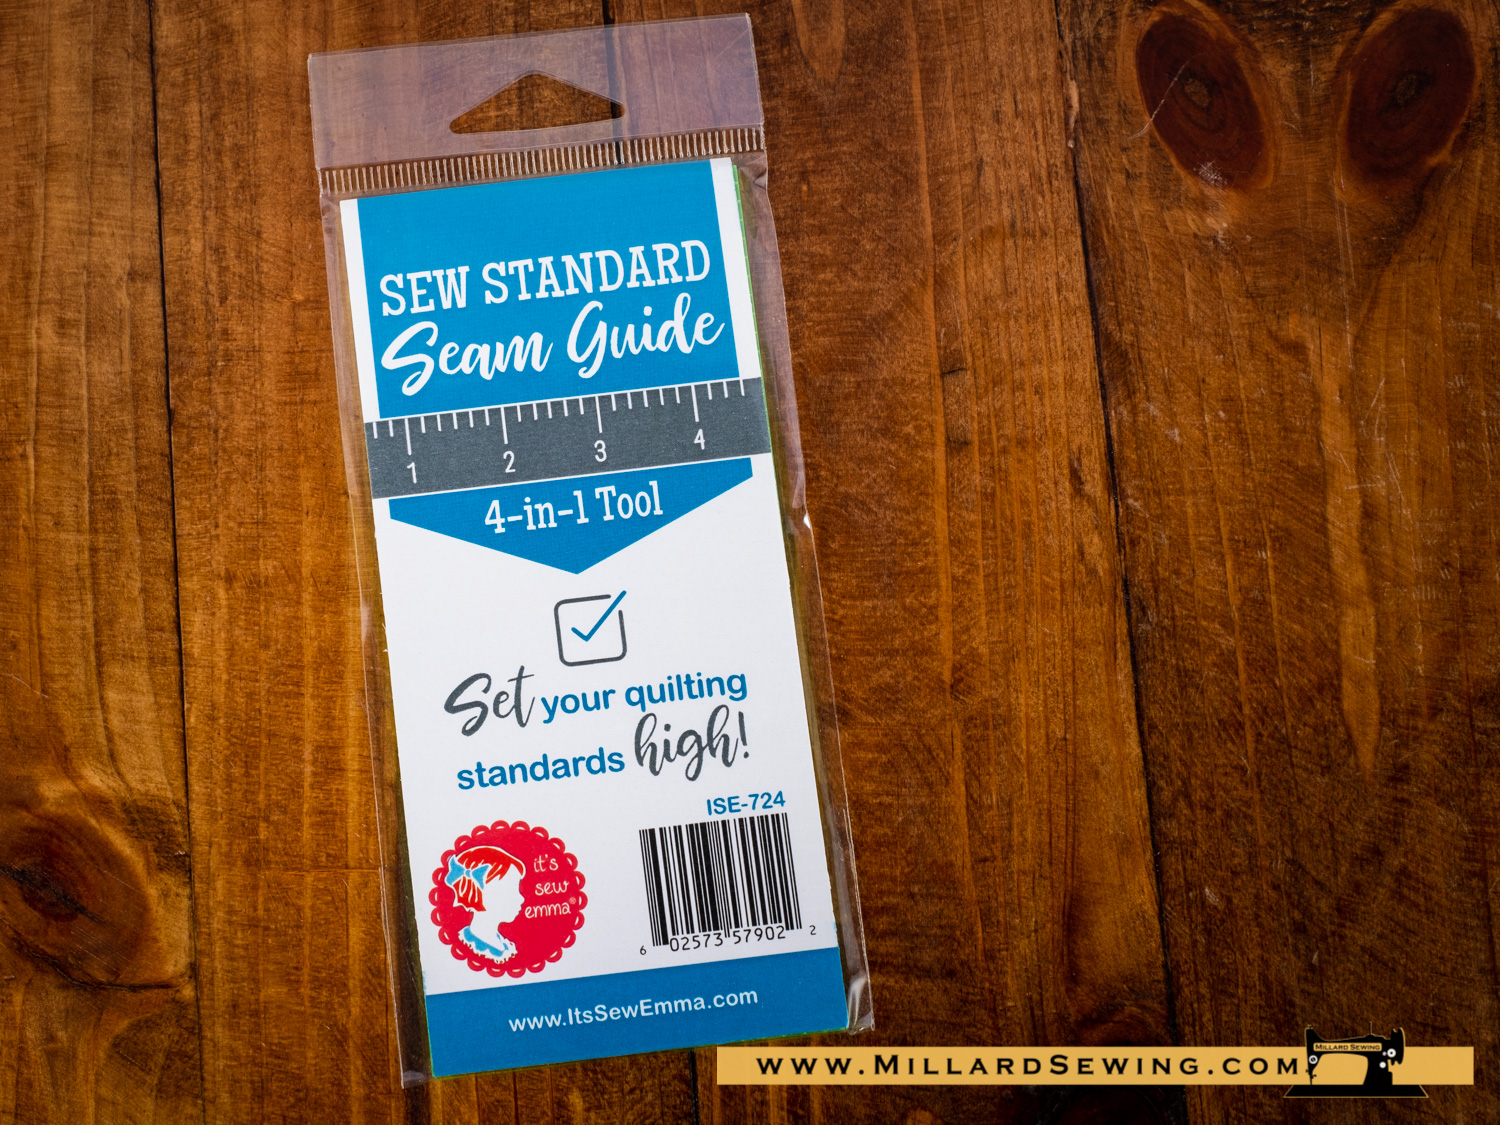 How to Use the Sew Standard Seam Guide by It's Sew Emma